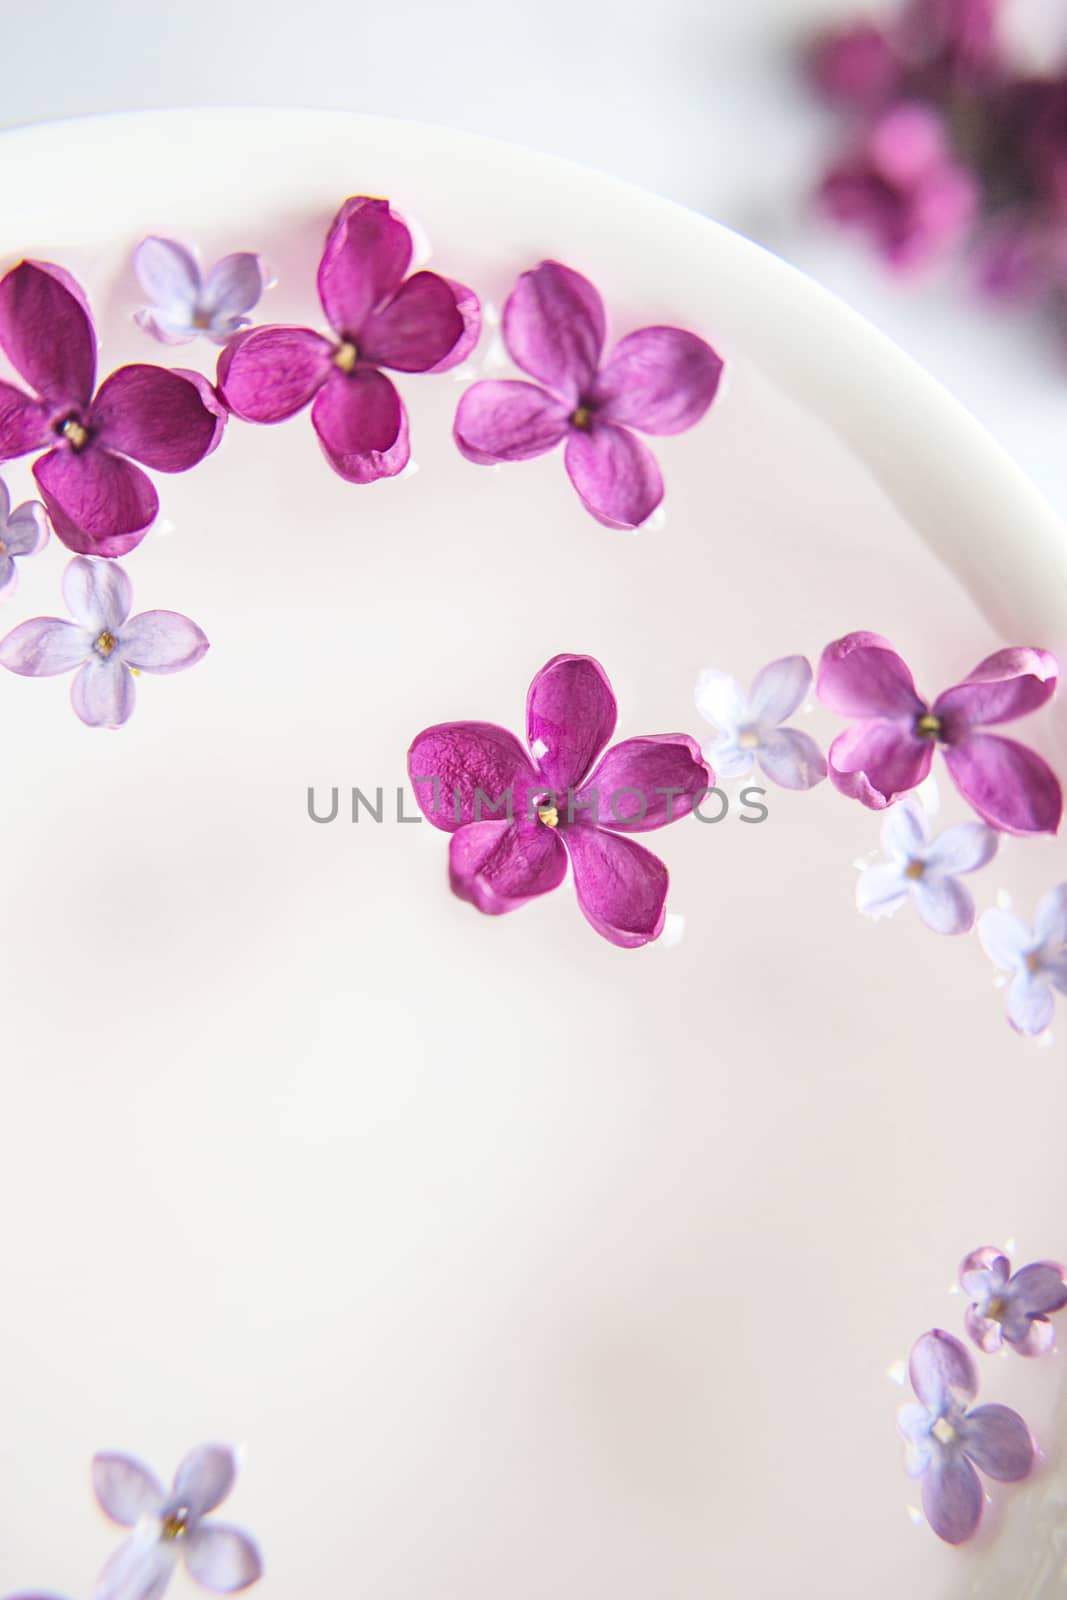 Five-pointed lilac flower among lilac flowers in a cup with water. Spa ritual. Lilac branch with a flower with 5 petals.